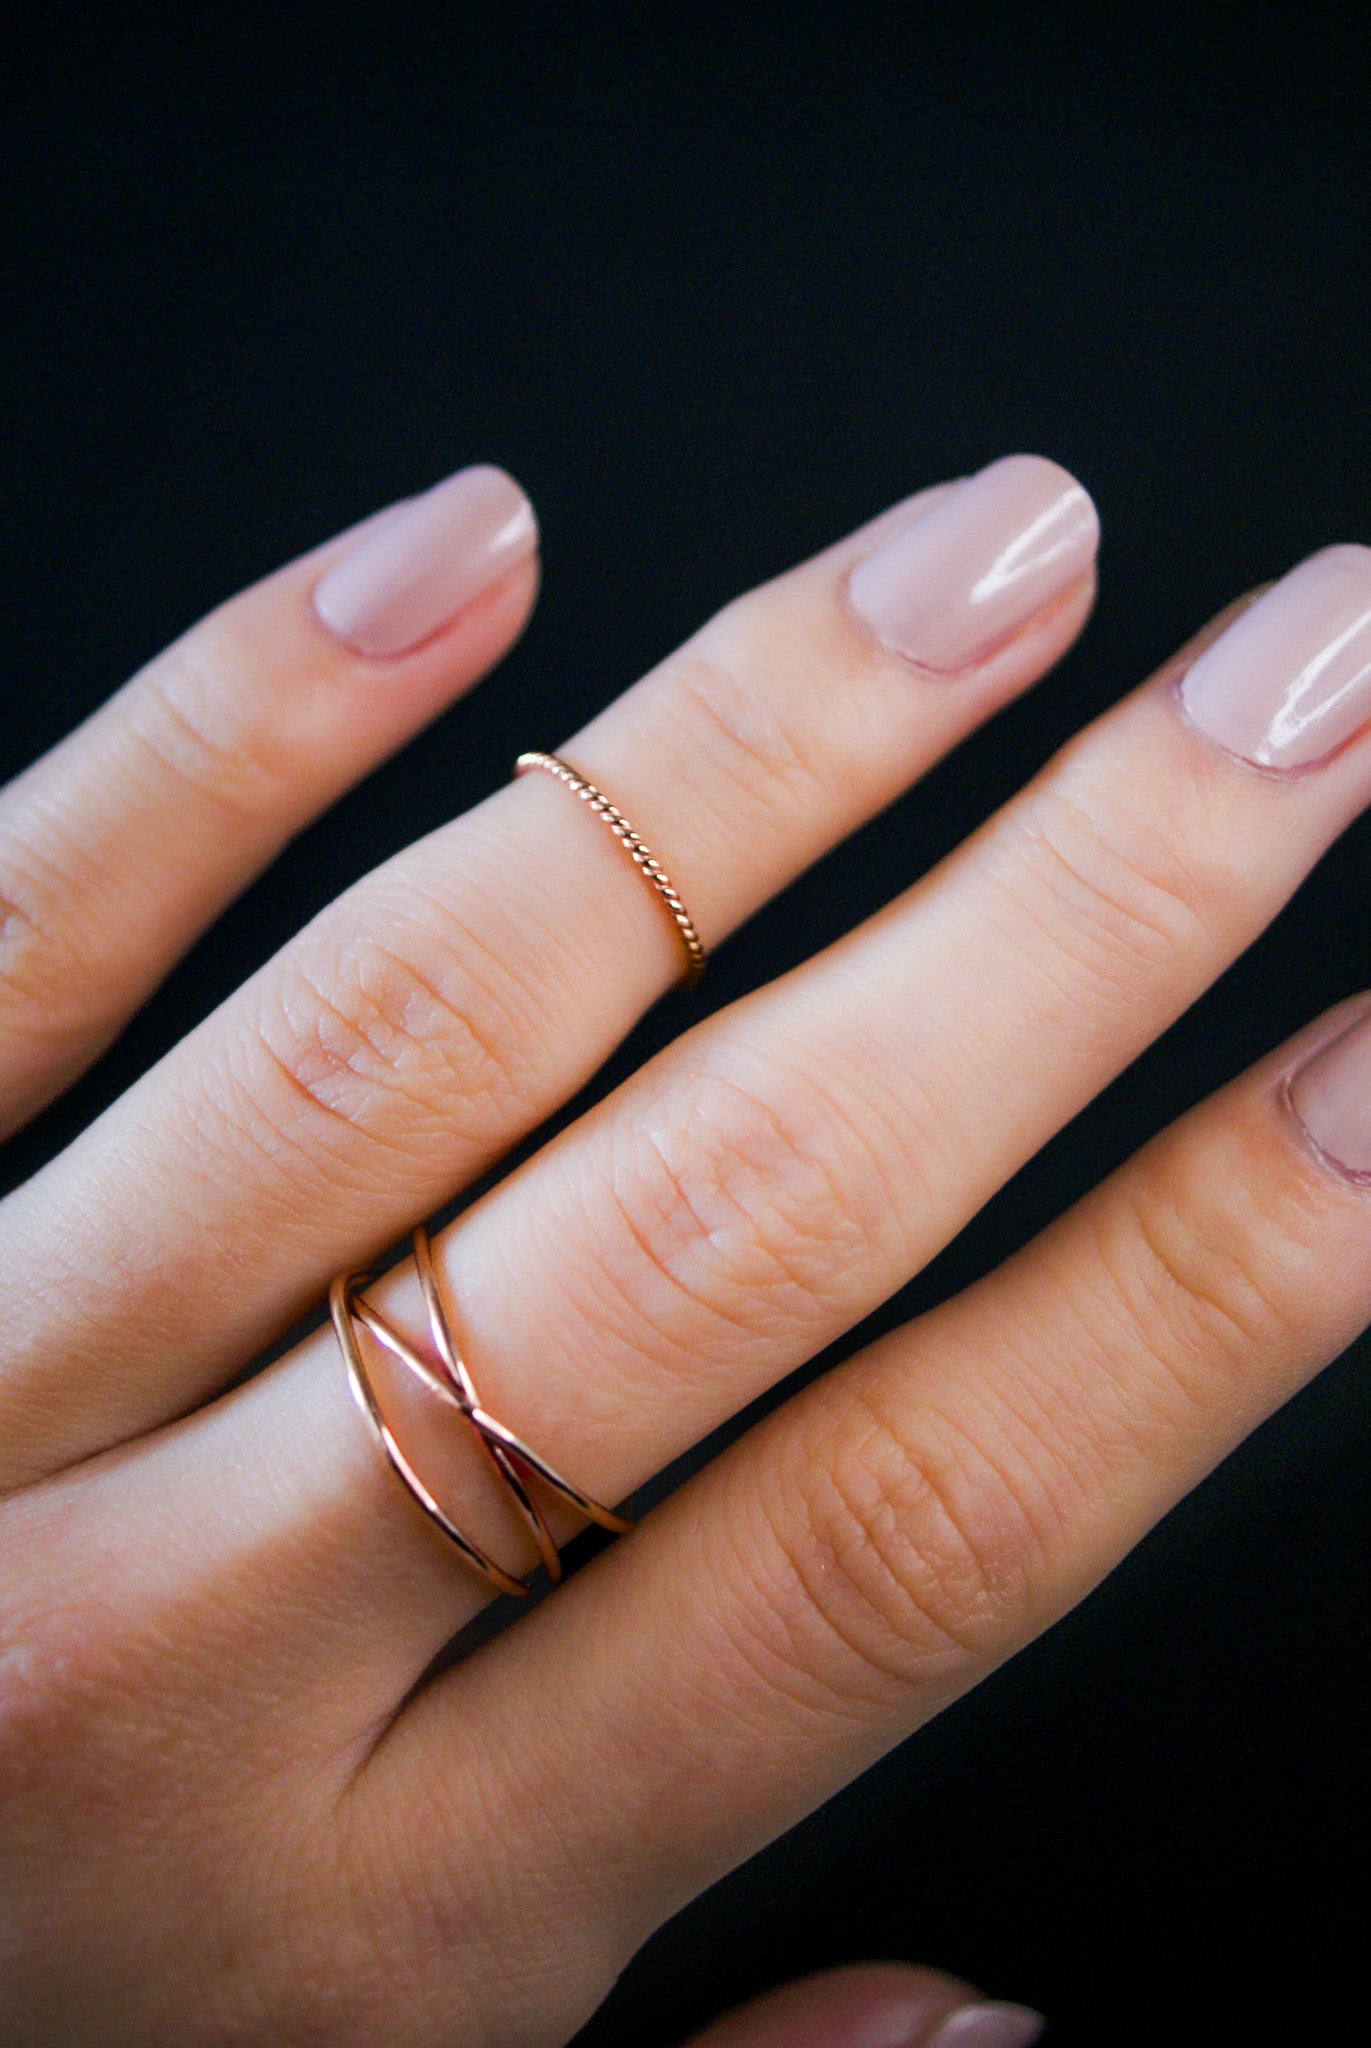 2 Piece Rose Gold Ring Set Stackable Eternity Layering Band Bands Bridal  Wedding Ring Cubic Zirconia 925 Sterling Silver Size 5-10